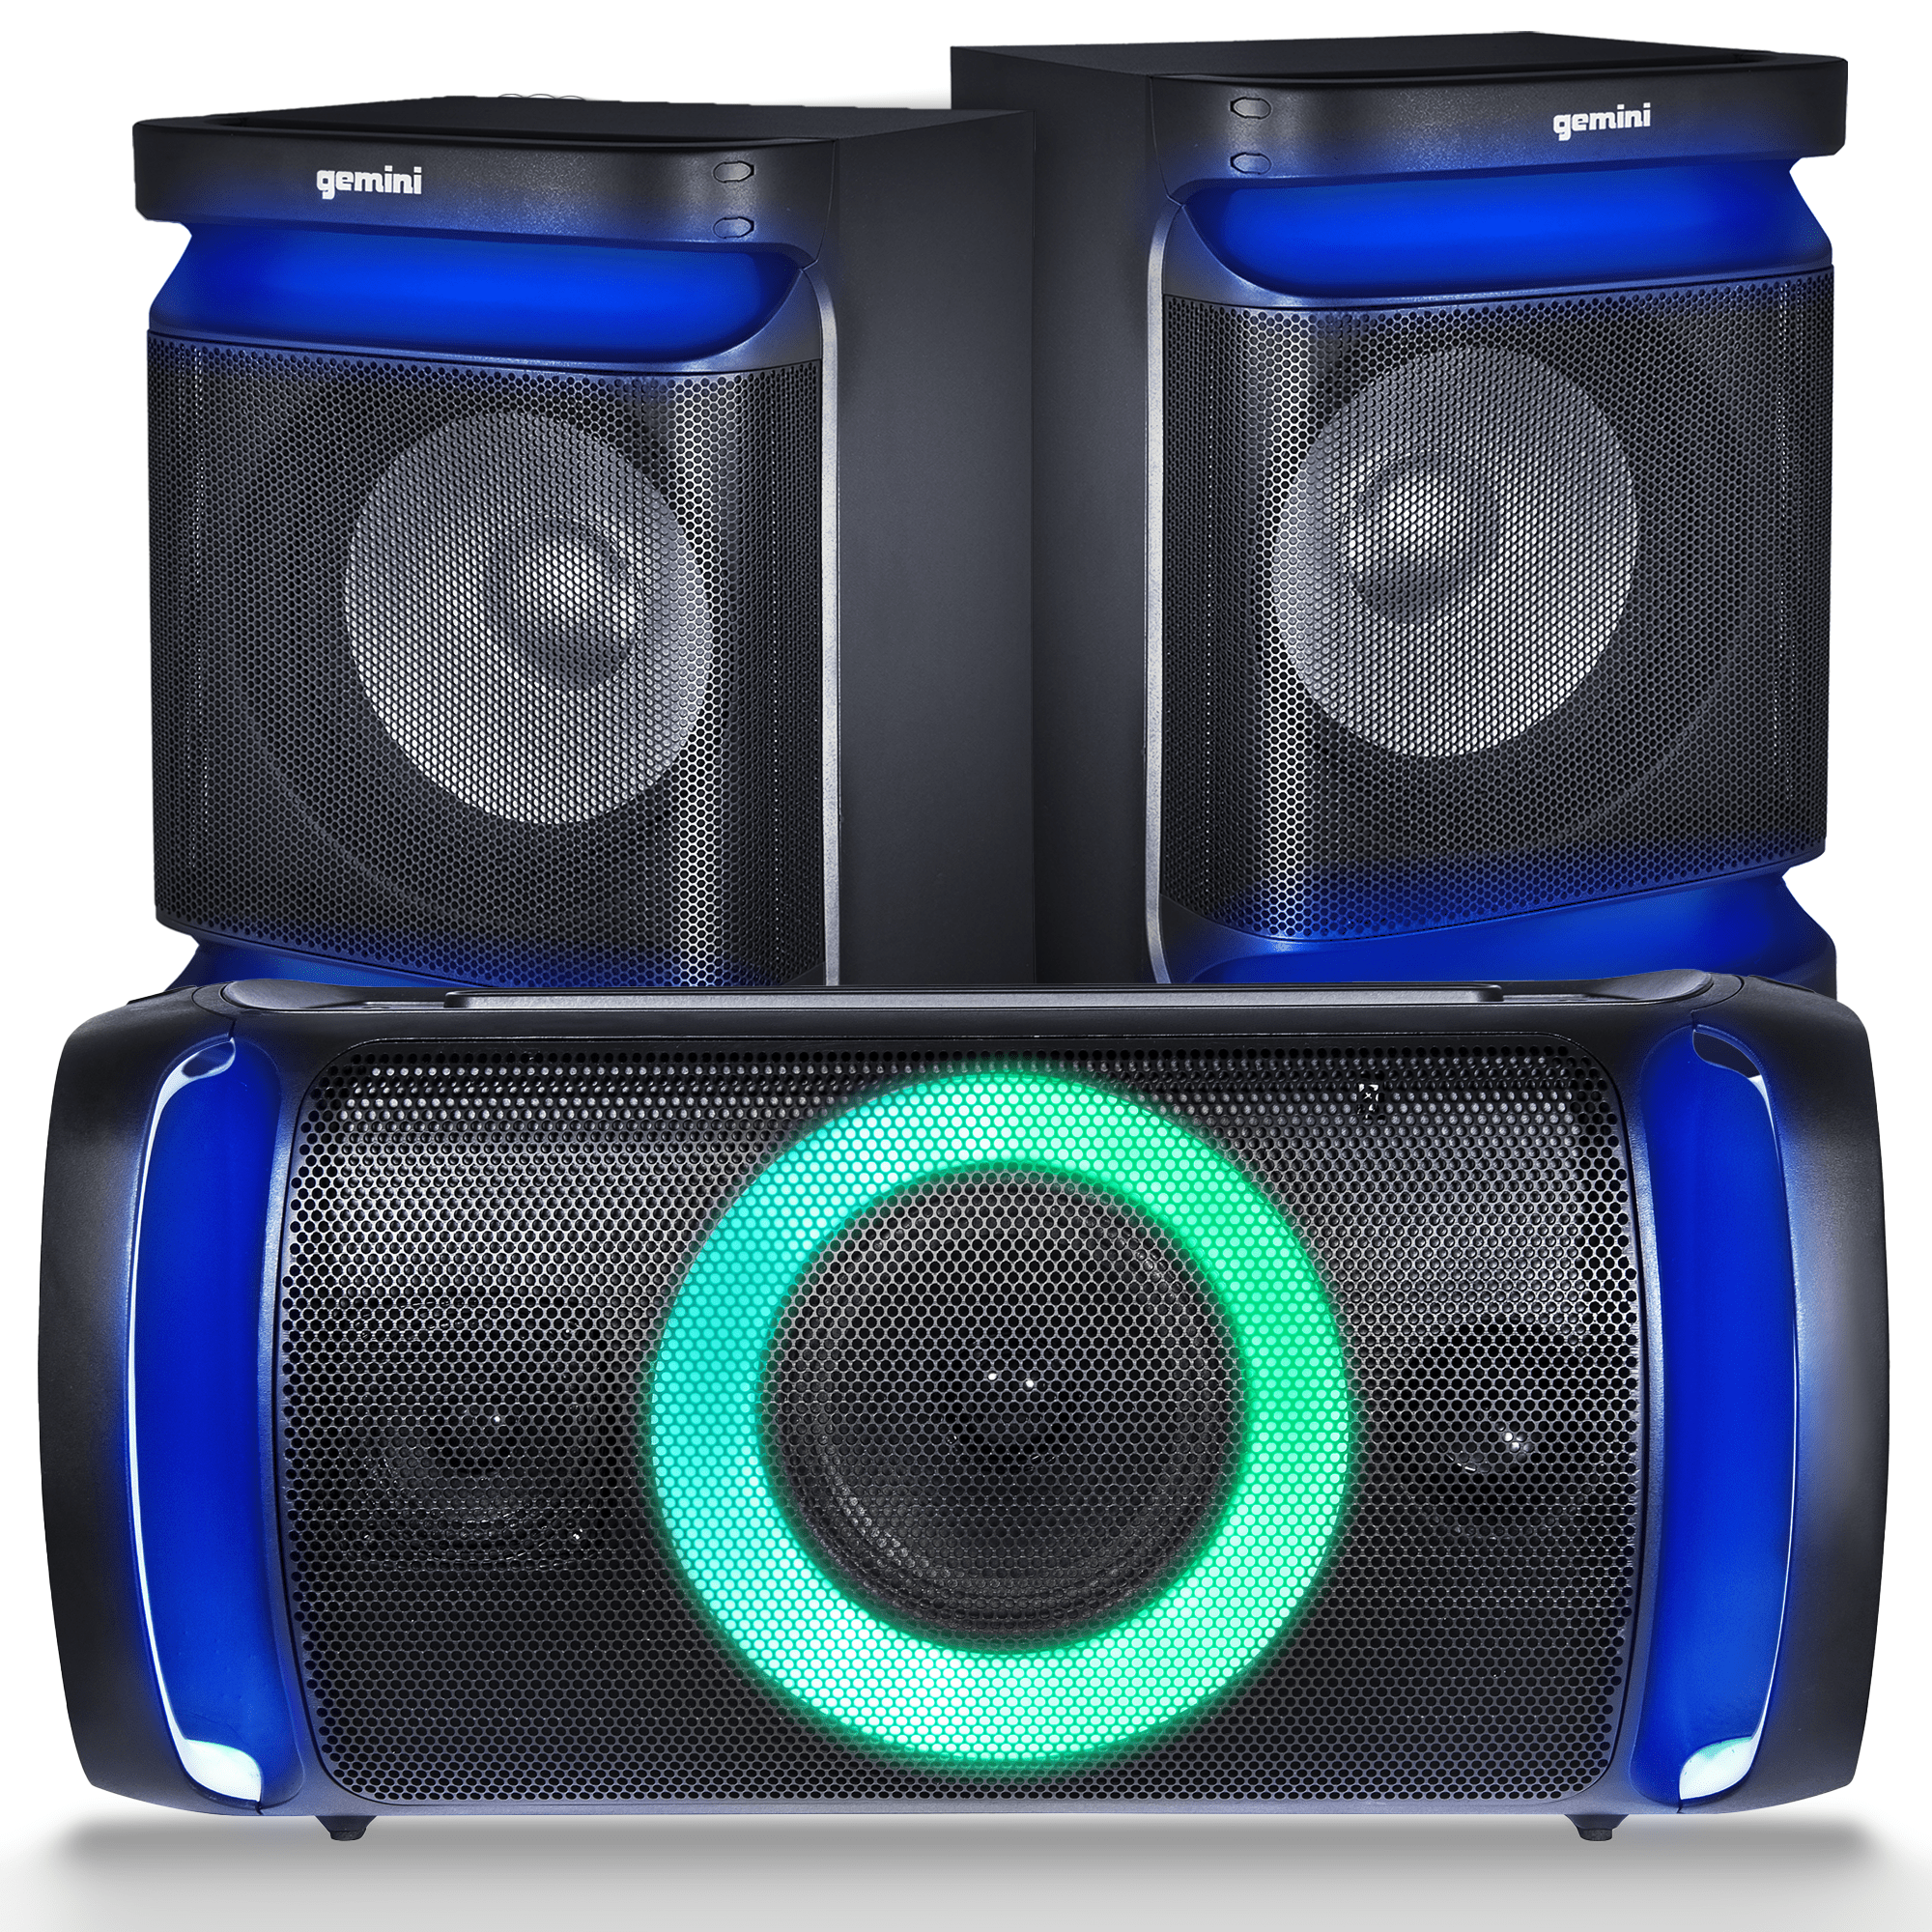 Gemini Sound: Bluetooth Speakers for Boundless Audio Experiences